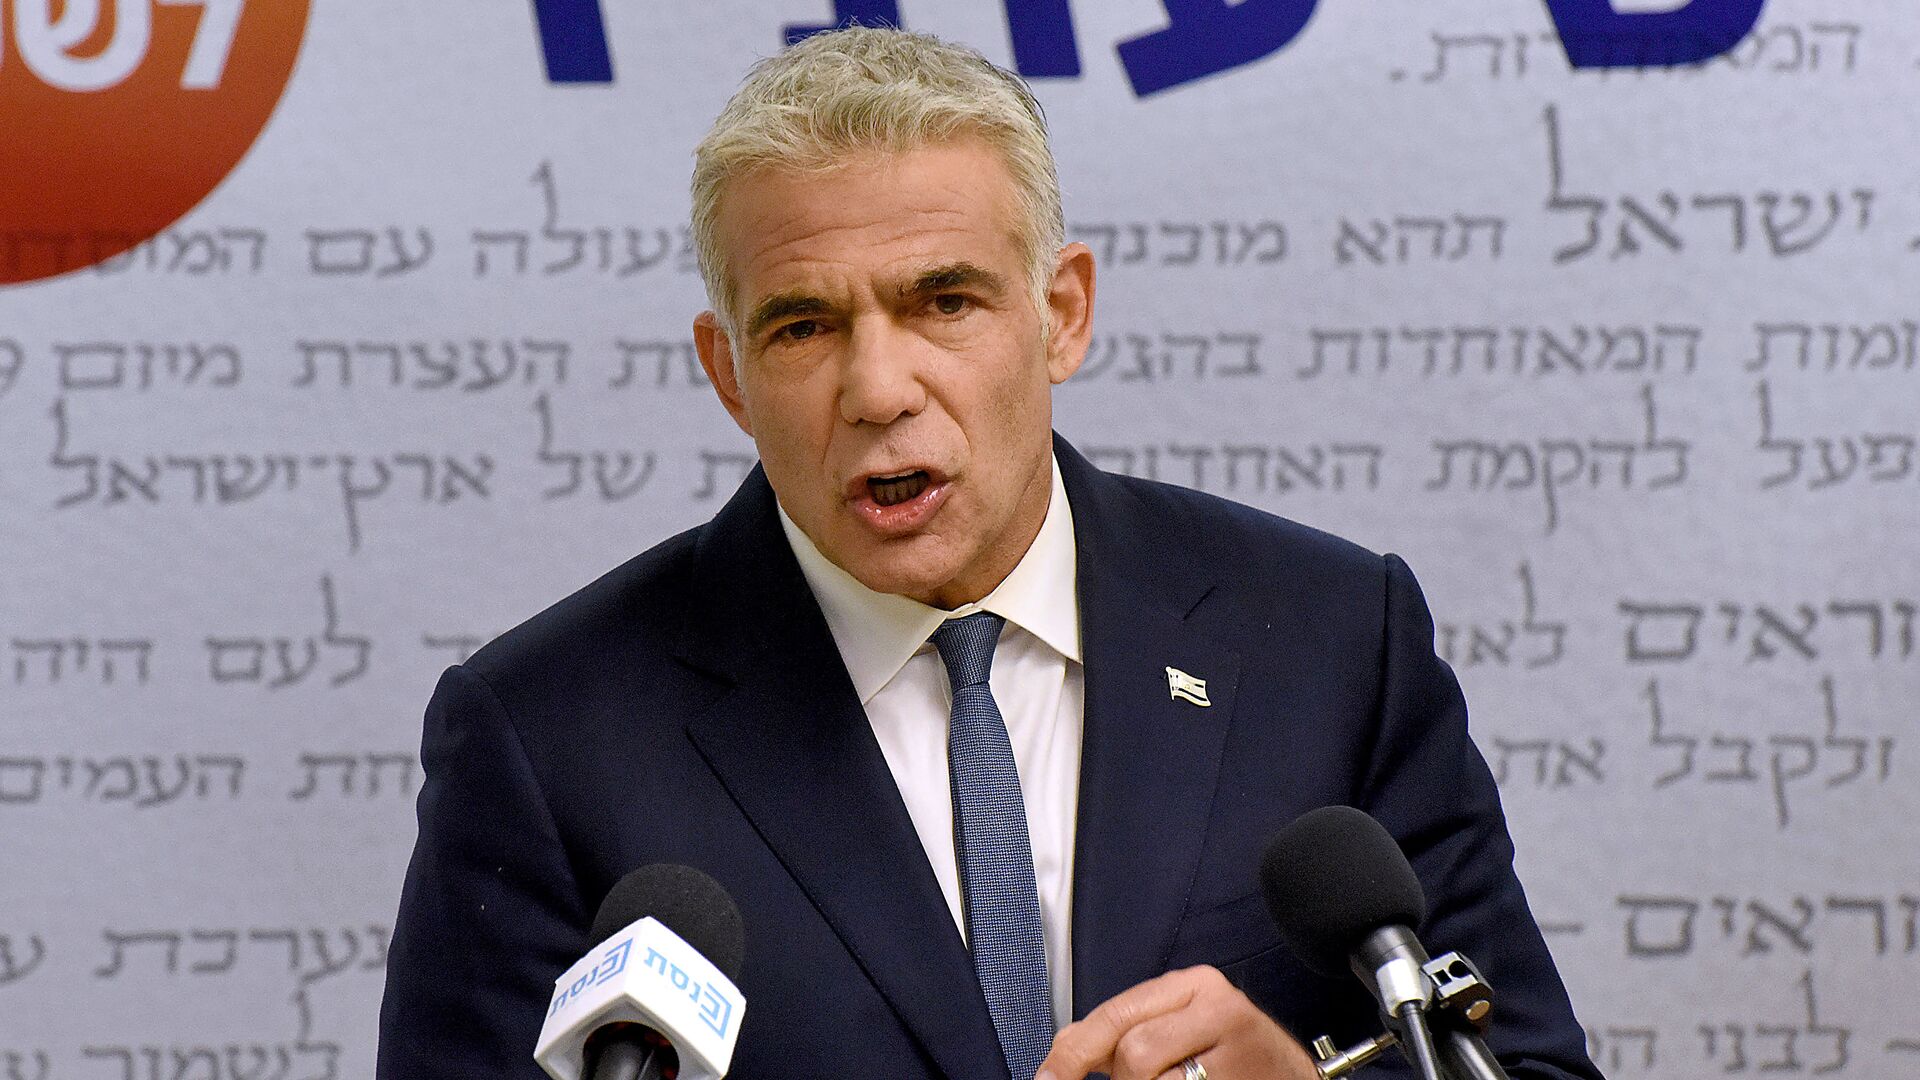 Israel's centrist opposition leader Yair Lapid delivers a statement to the press at the Knesset (Israeli parliament) in Jerusalem on May 31, 2021. - Lapid said many obstacles remain before a diverse coalition to oust long-serving right-wing Prime Minister Benjamin Netanyahu can be agreed. - Sputnik International, 1920, 27.07.2022